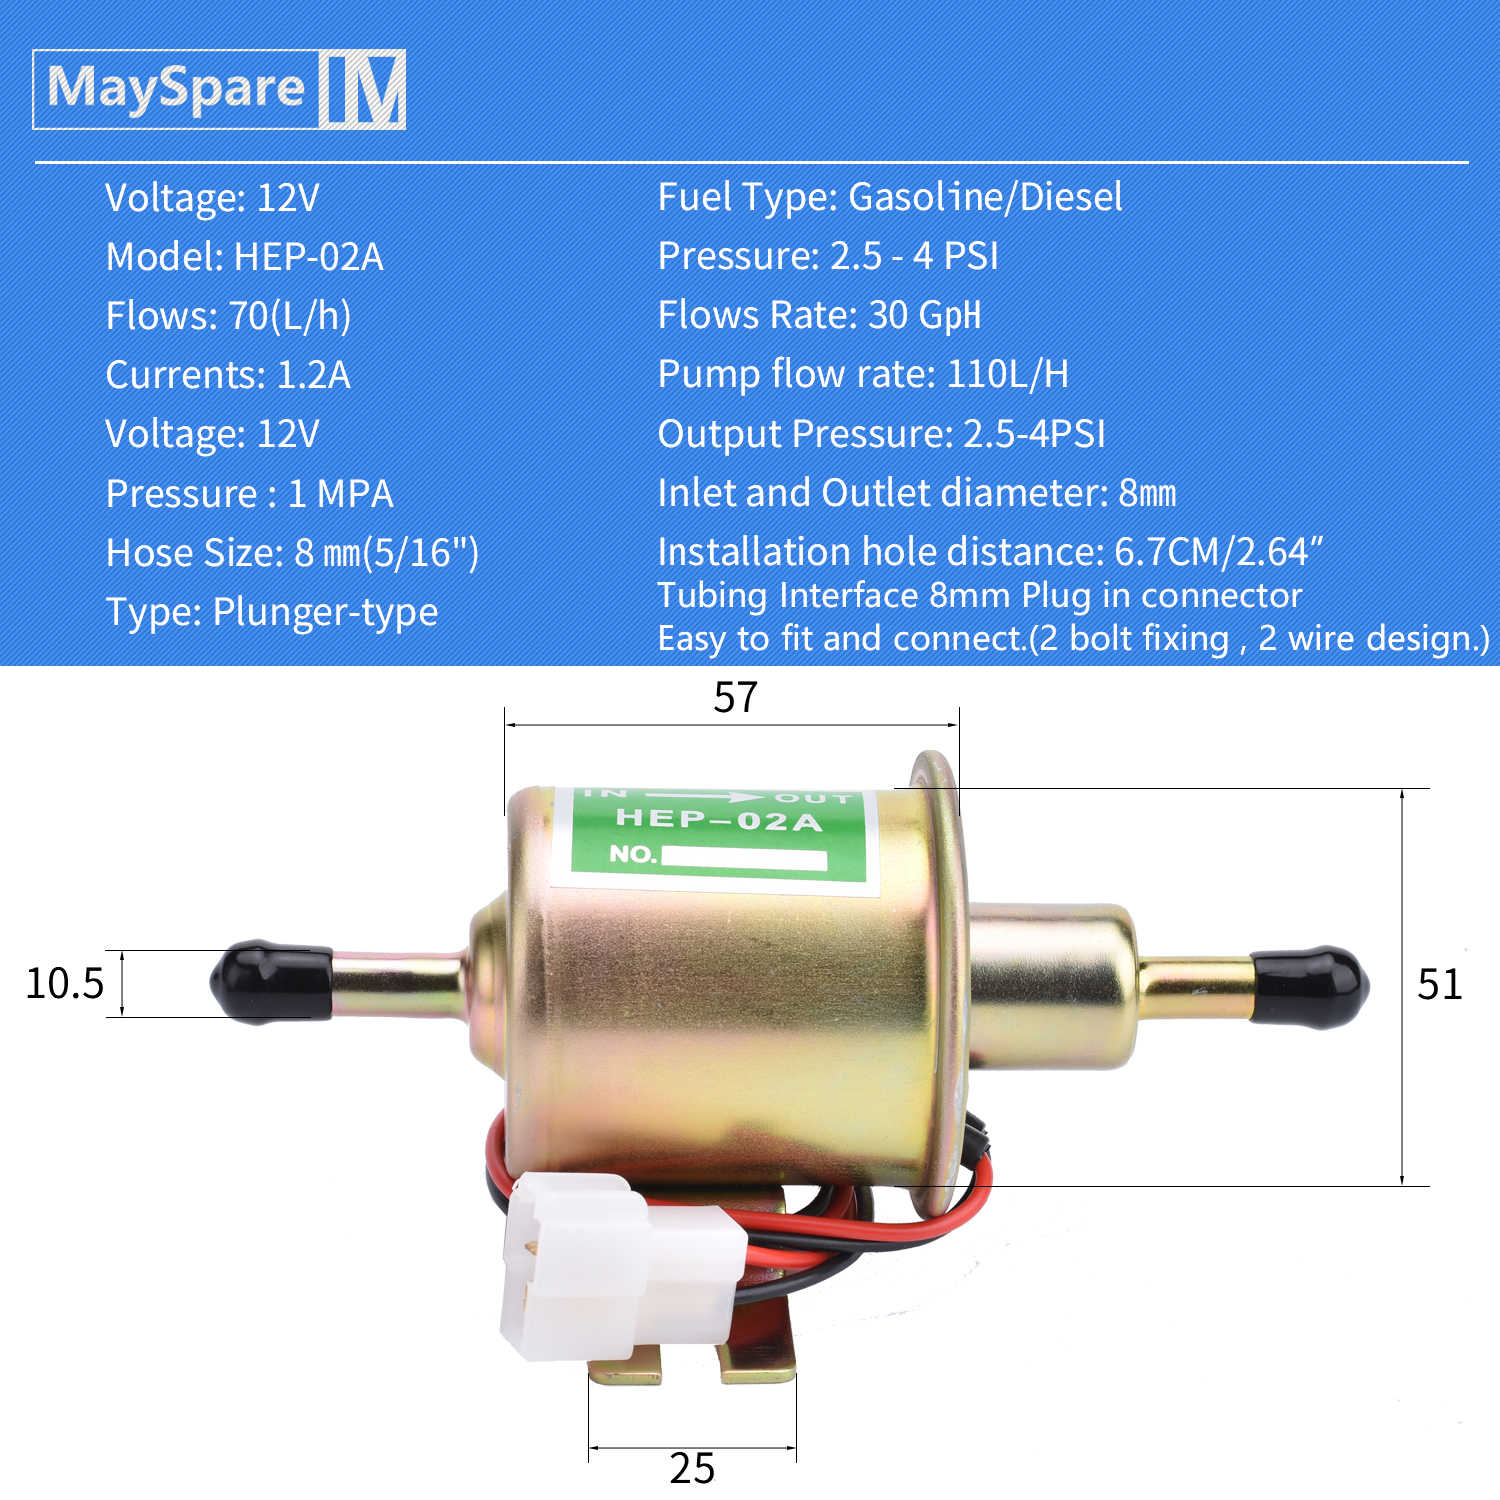 Universal Gas and Diesel Electric Fuel Pump DC 12V (Output Pressure 3-6  PSI) Heavy Duty Inline Fuel Pump Metal Solid Petrol 12 Volts HEP-02A